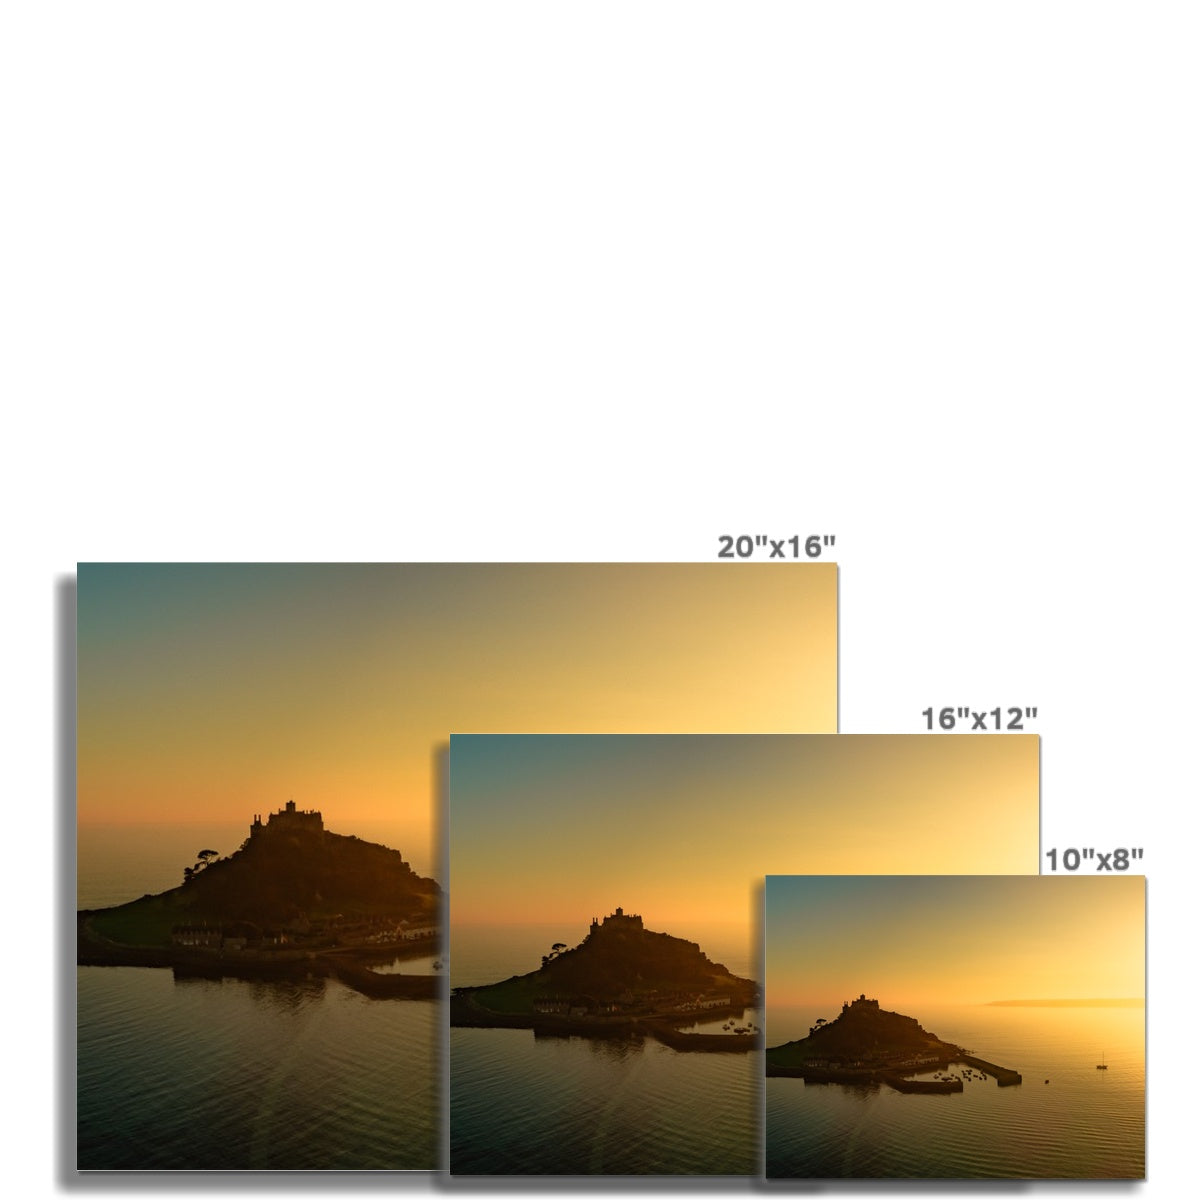 st michaels mount sunset picture sizes